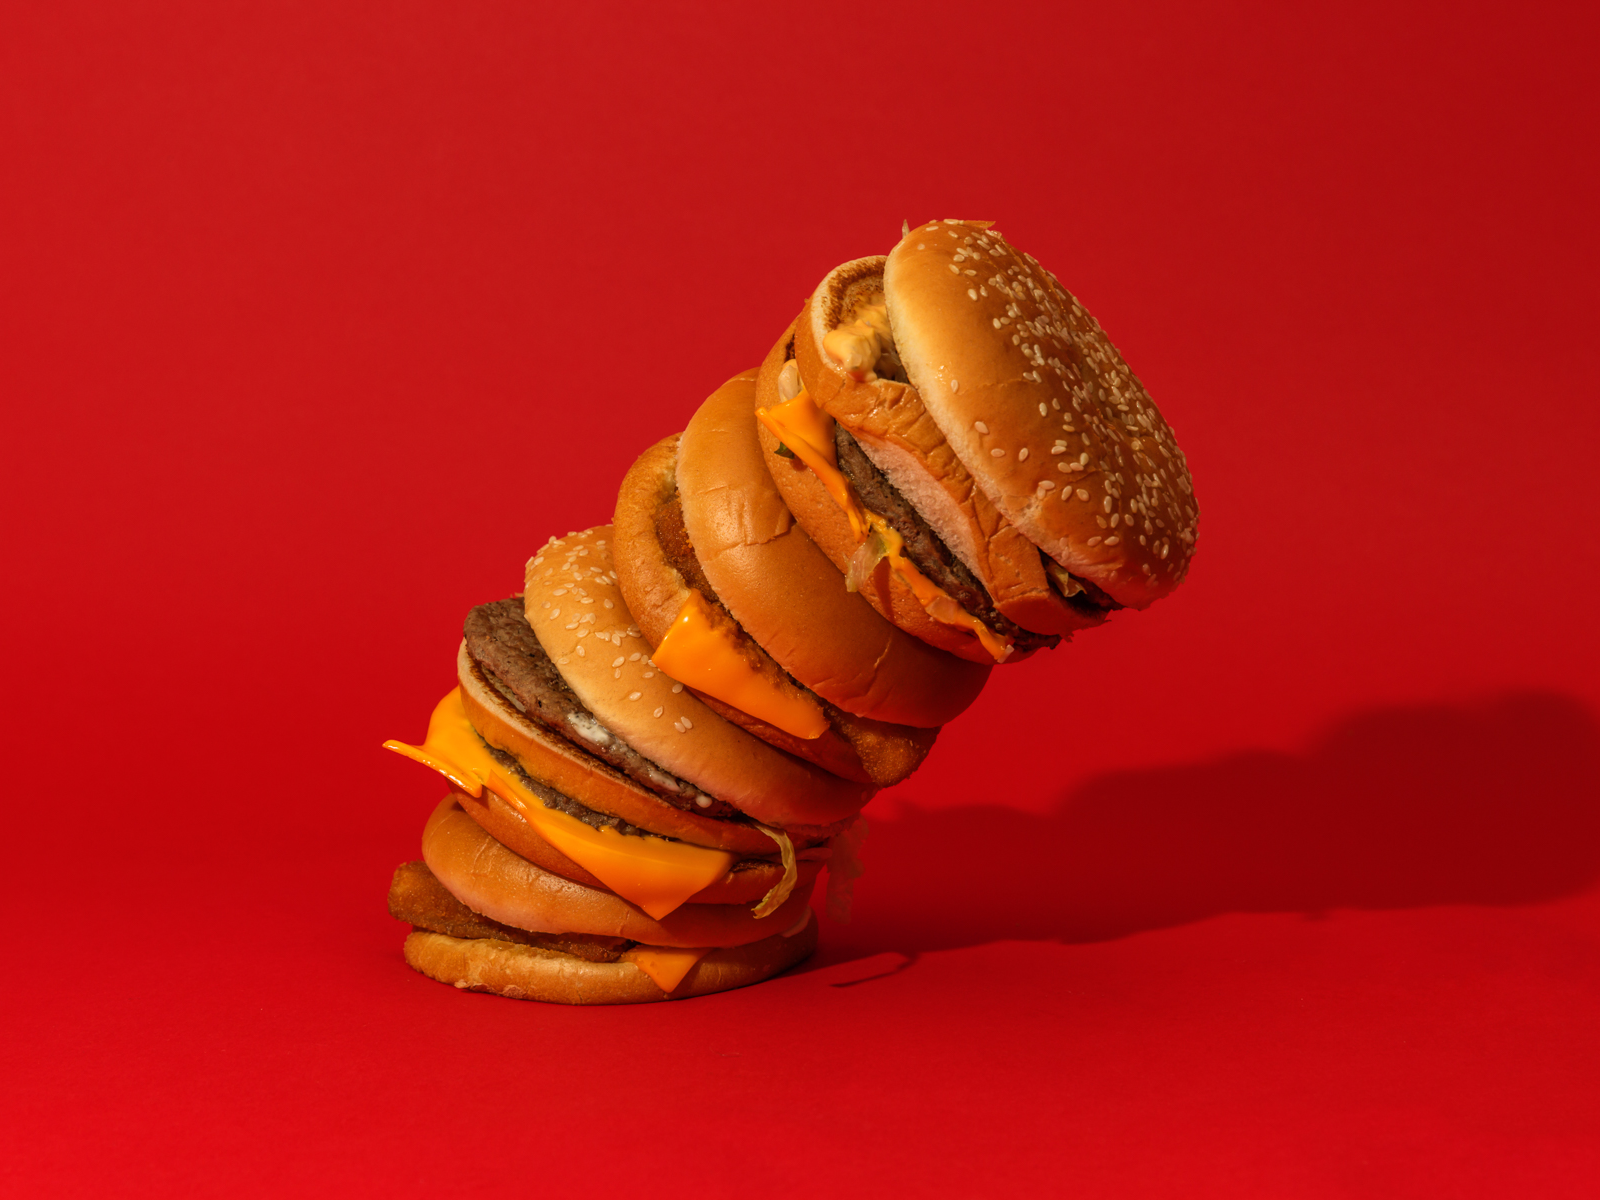  McDonald's Hintergrundbild 1600x1200. McDonald's is temporarily changing how restaurants get burgers, bacon, and sausages, with CEO saying the state of the meat supply chain is 'concerning' (MCD). Business Insider Africa